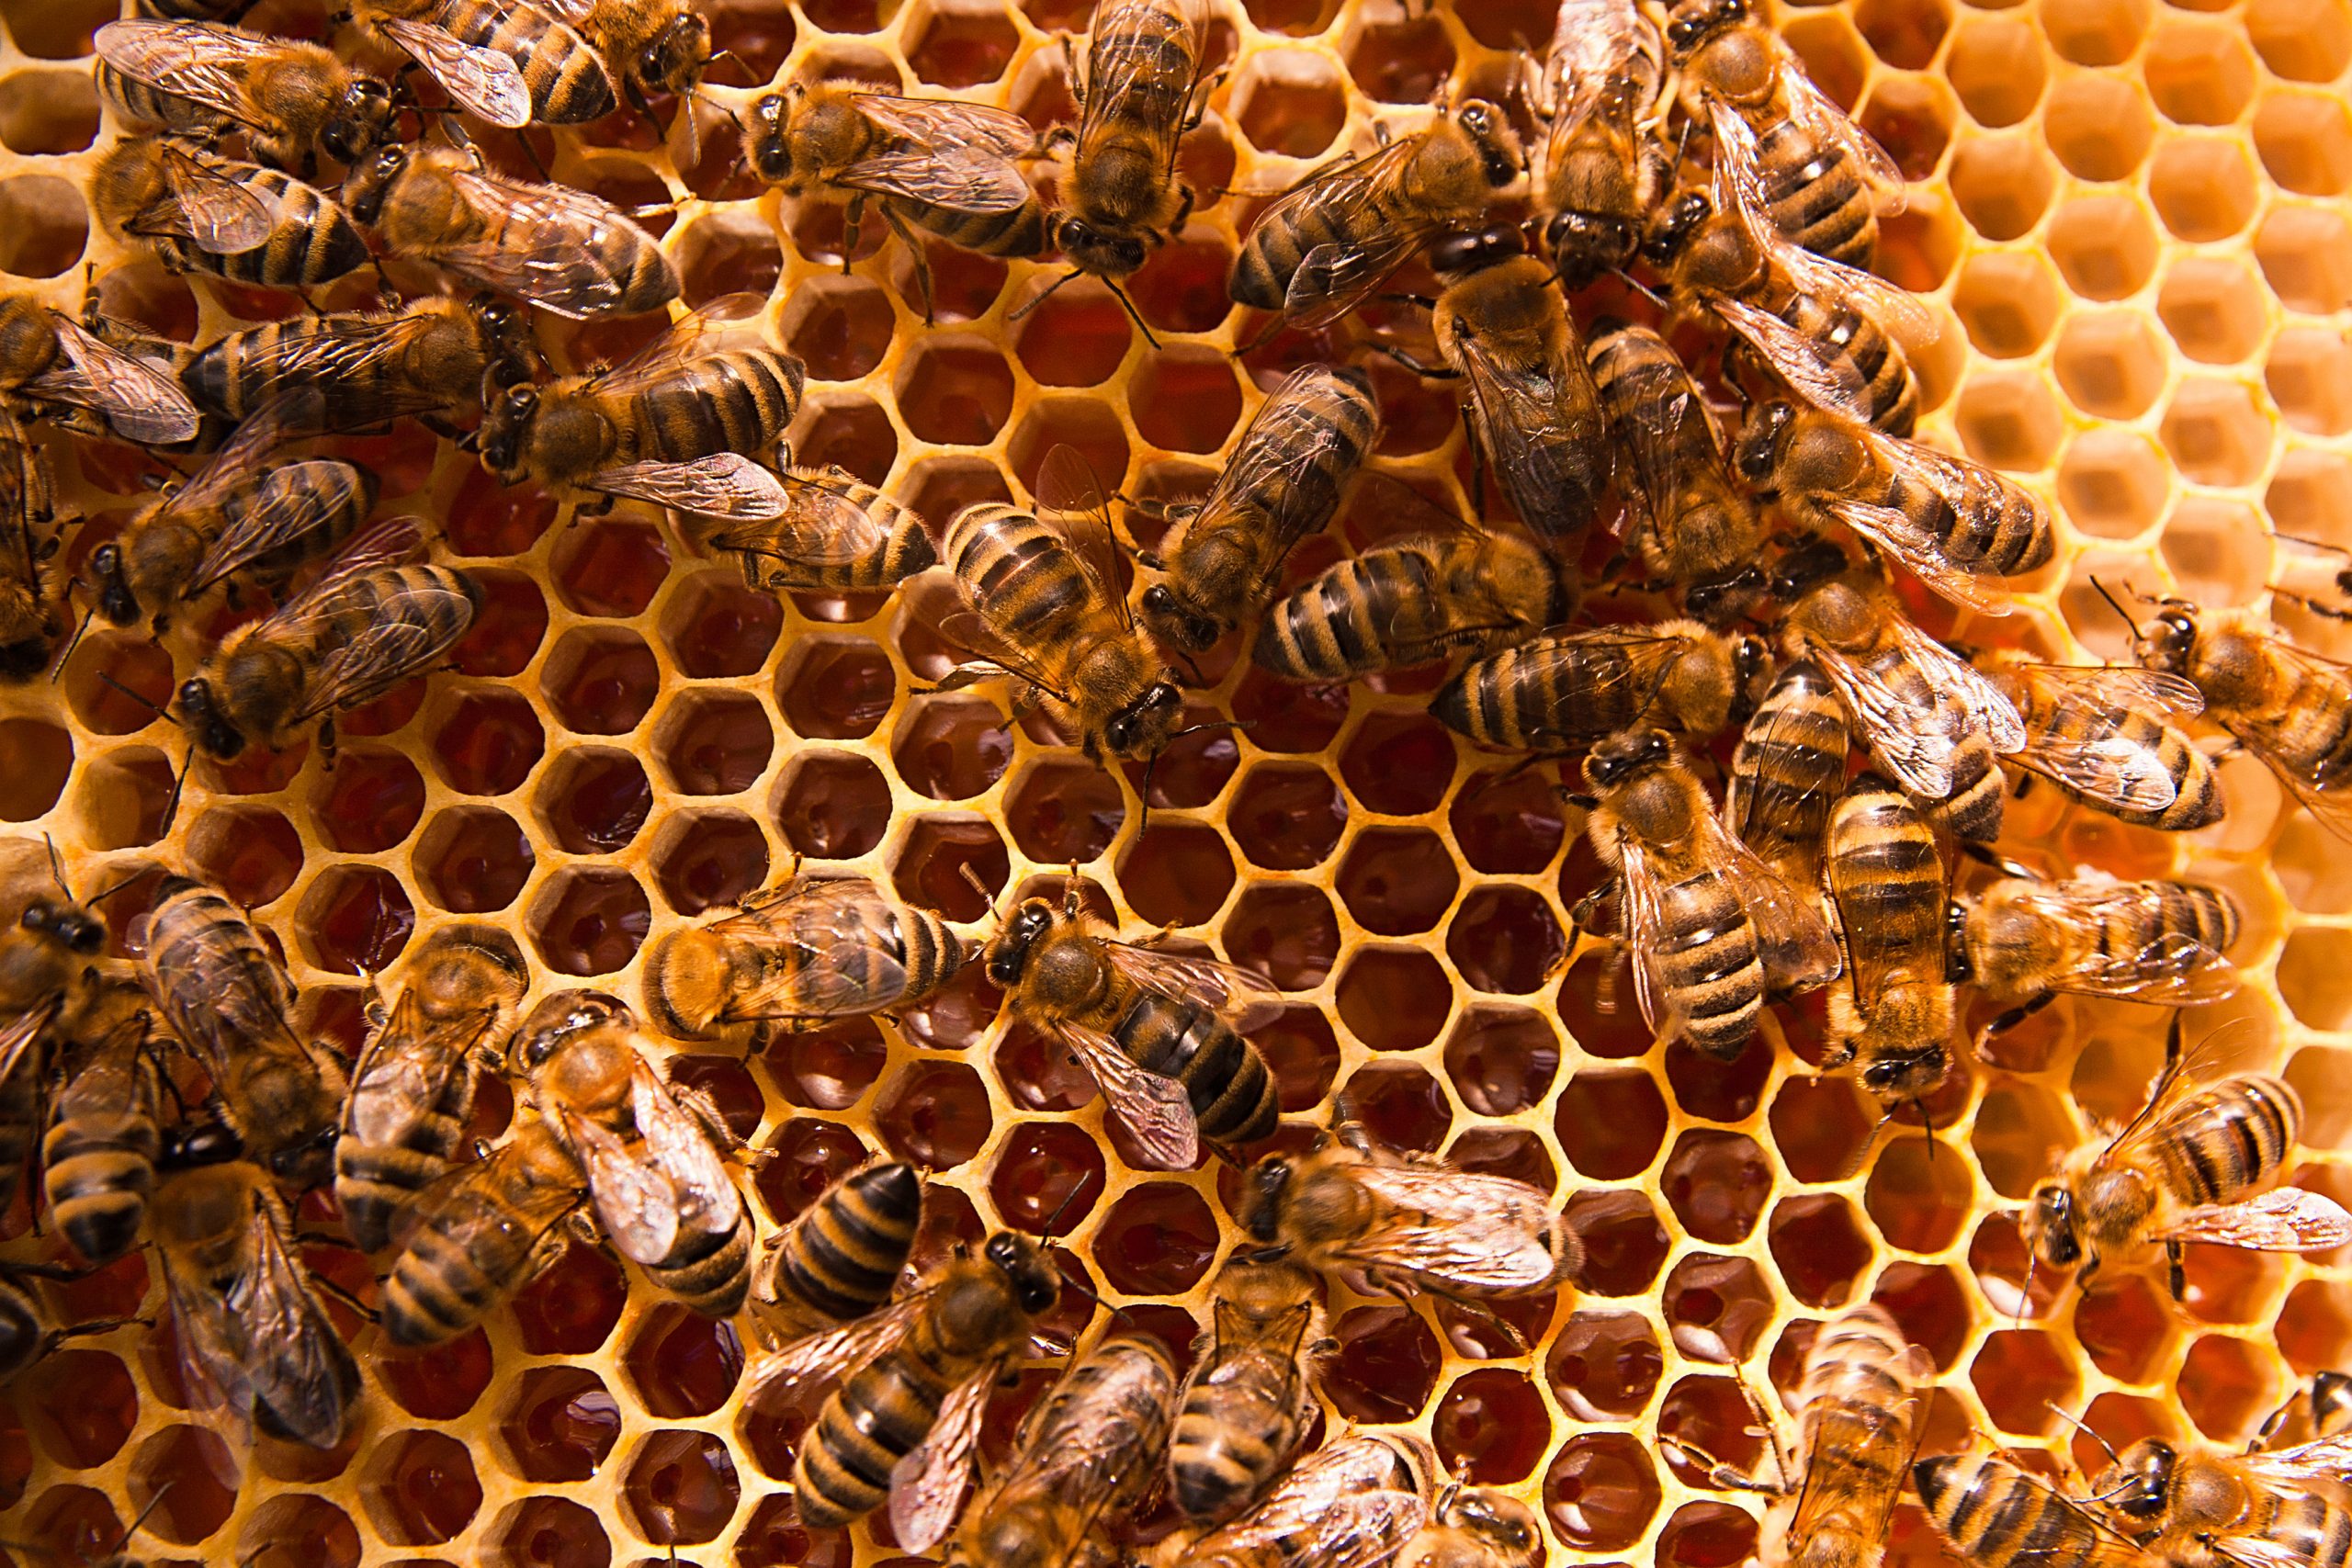 An Honest Look at Life Without Honeybees